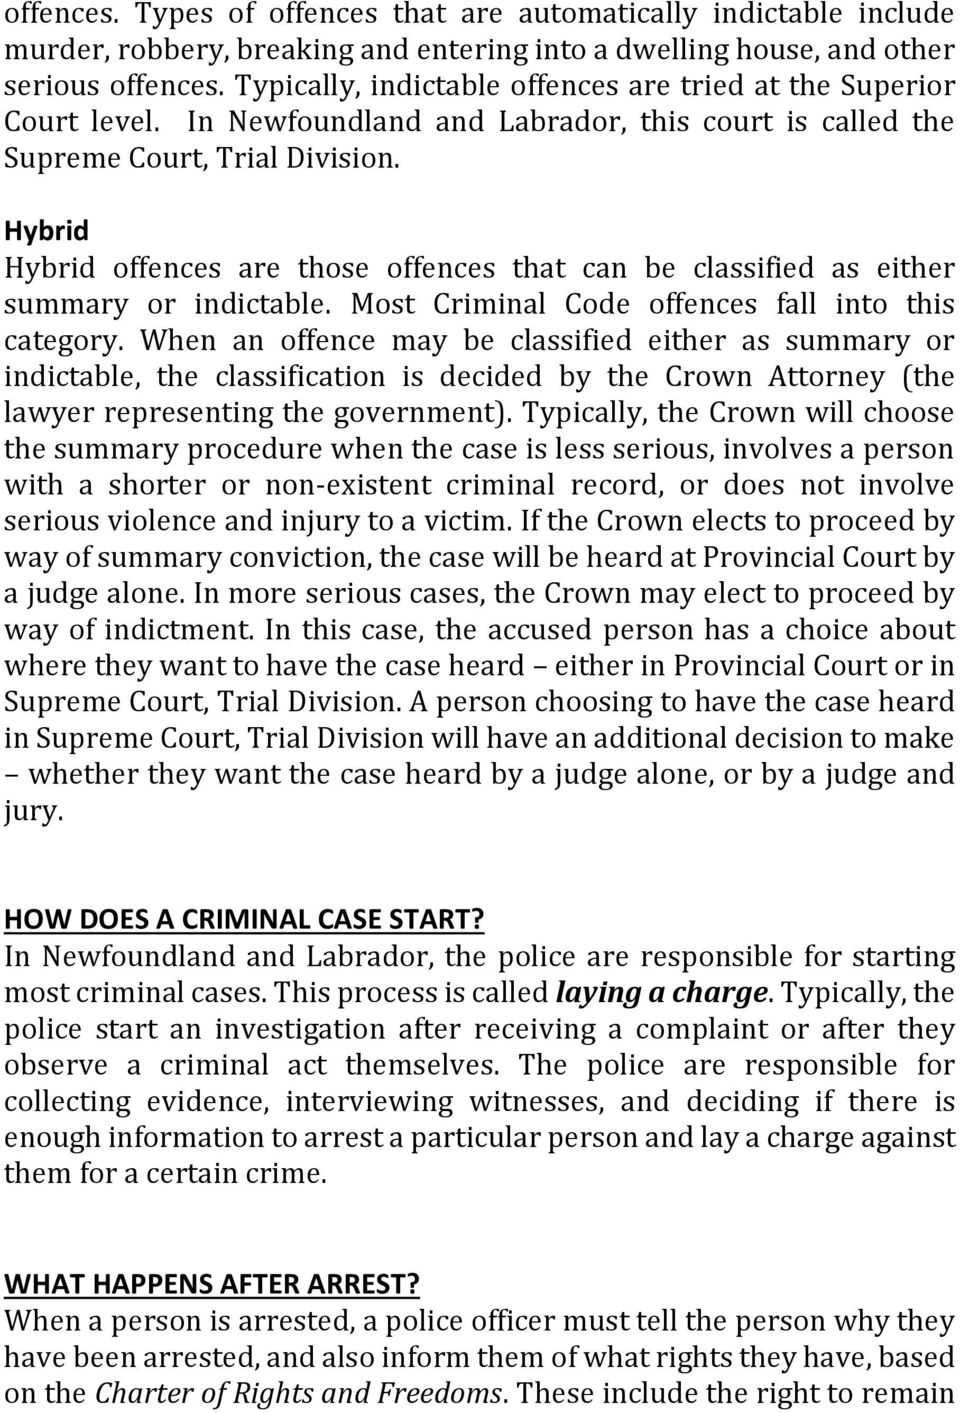 Hybrid Hybrid offences are those offences that can be classified as either summary or indictable. Most Criminal Code offences fall into this category.